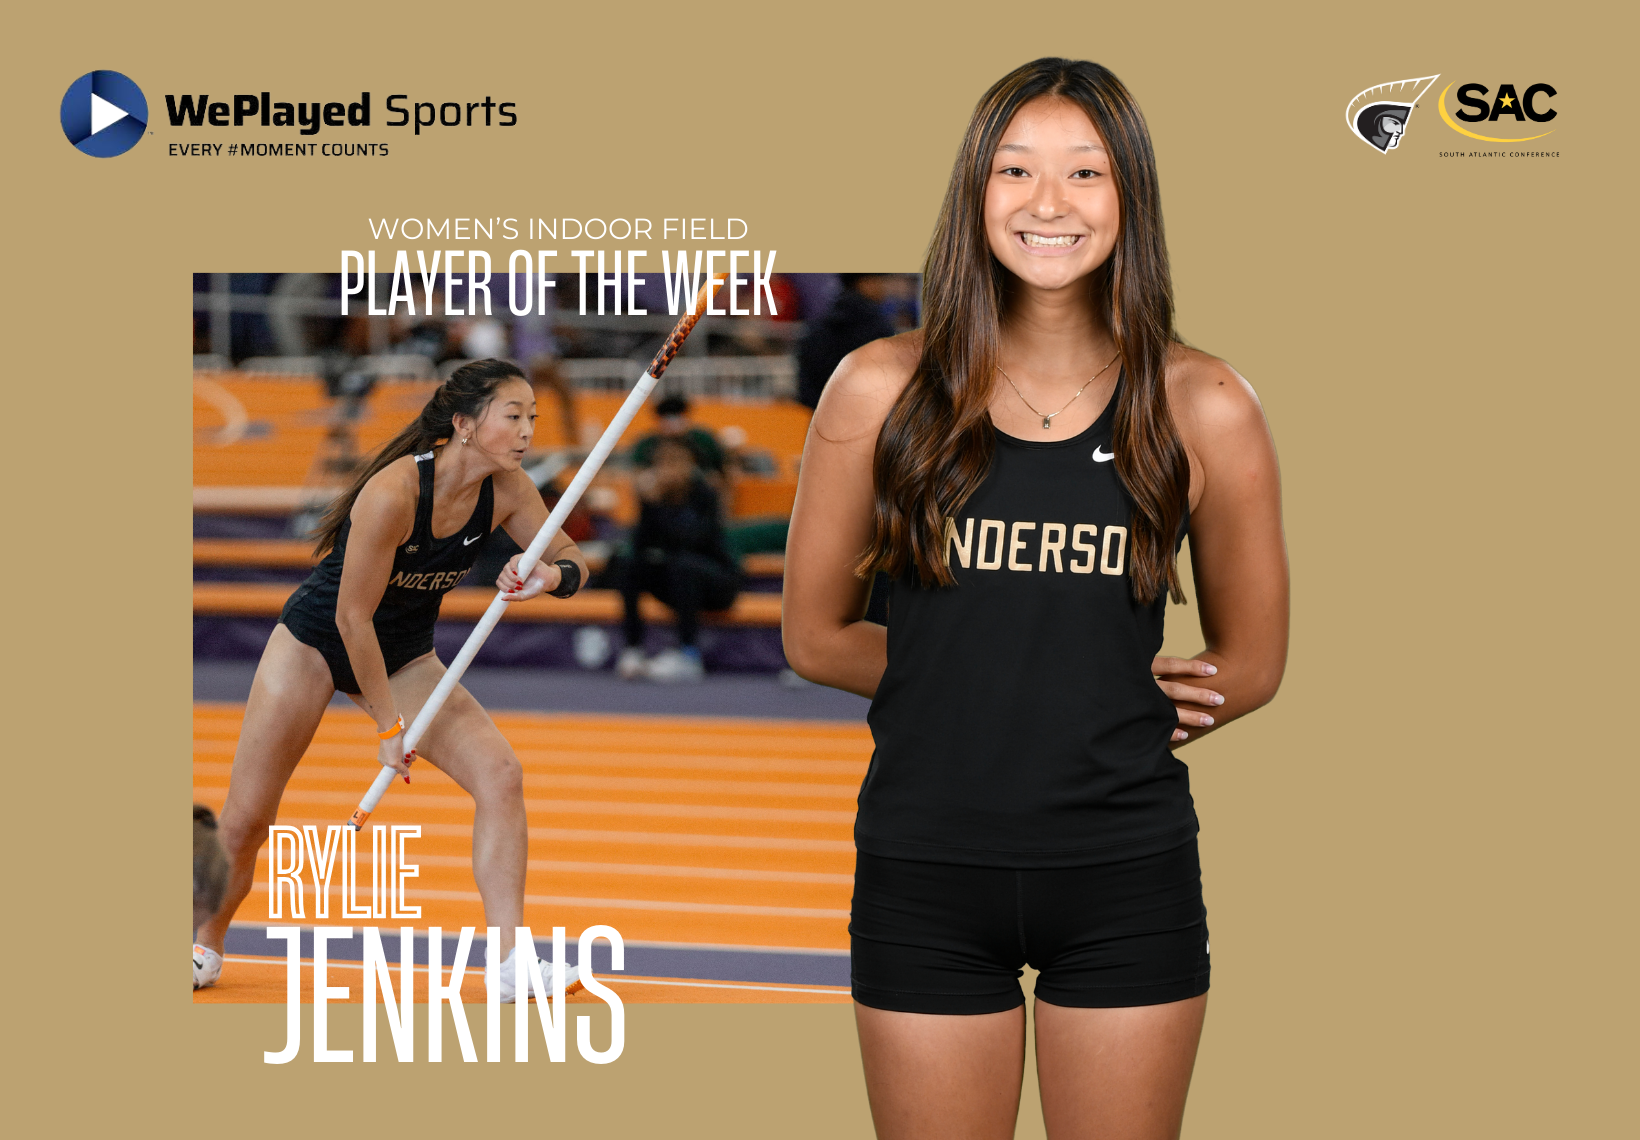 Jenkins Named WePlayed Sports Women's Indoor Field Player of the Week